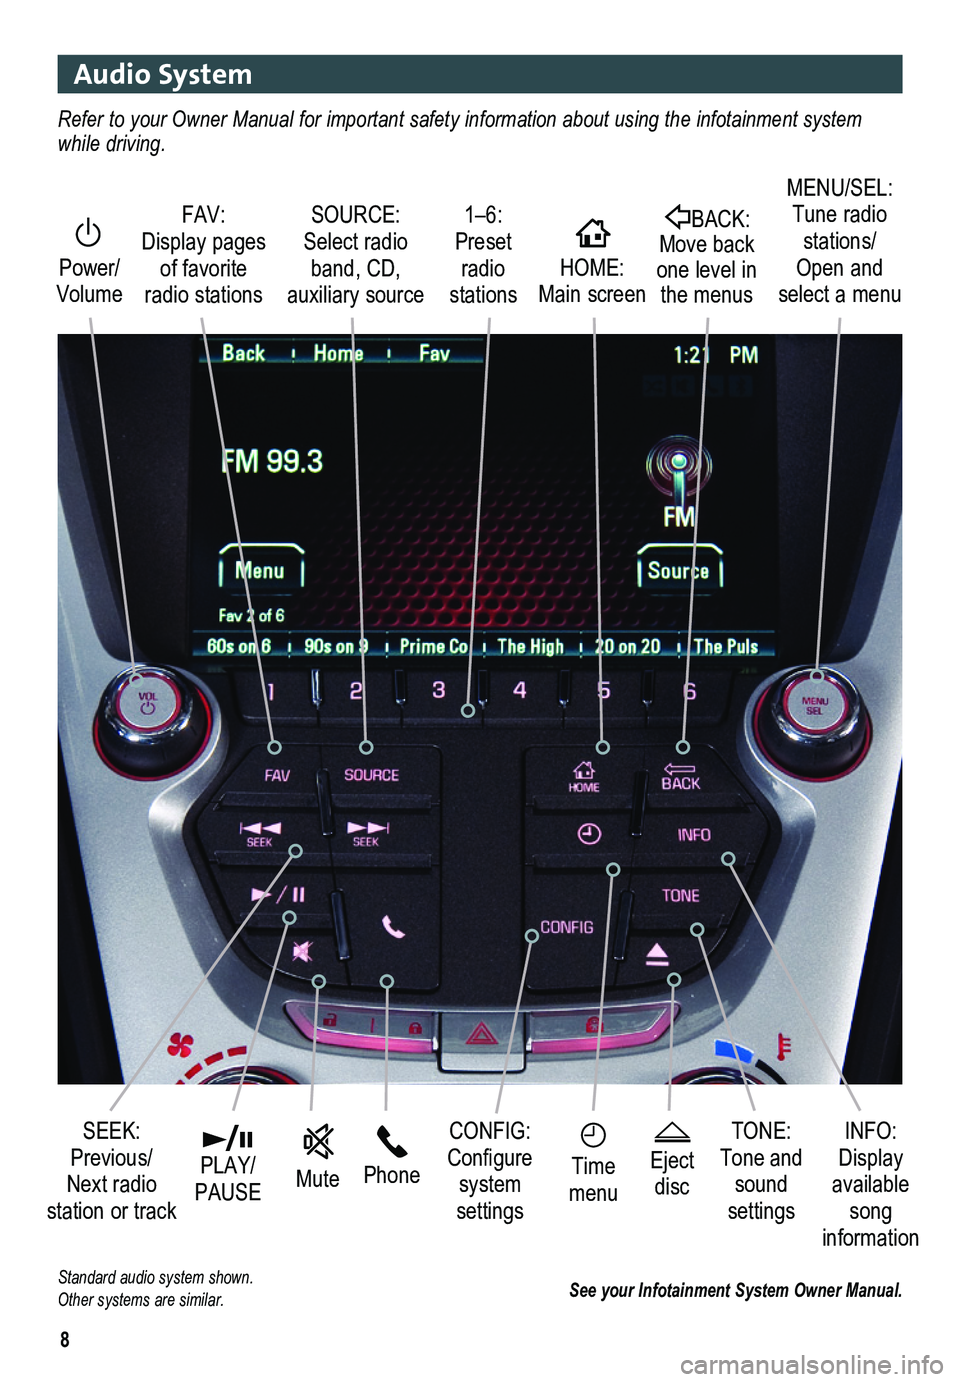 GMC TERRAIN 2014  Get To Know Guide 8
Audio System 
See your Infotainment System Owner Manual.
  Power/ Volume
HOME HOME: Main screen
BACK: Move back one level in the menus
1–6: Preset radio stations
SOURCE: Select radio band, CD, aux